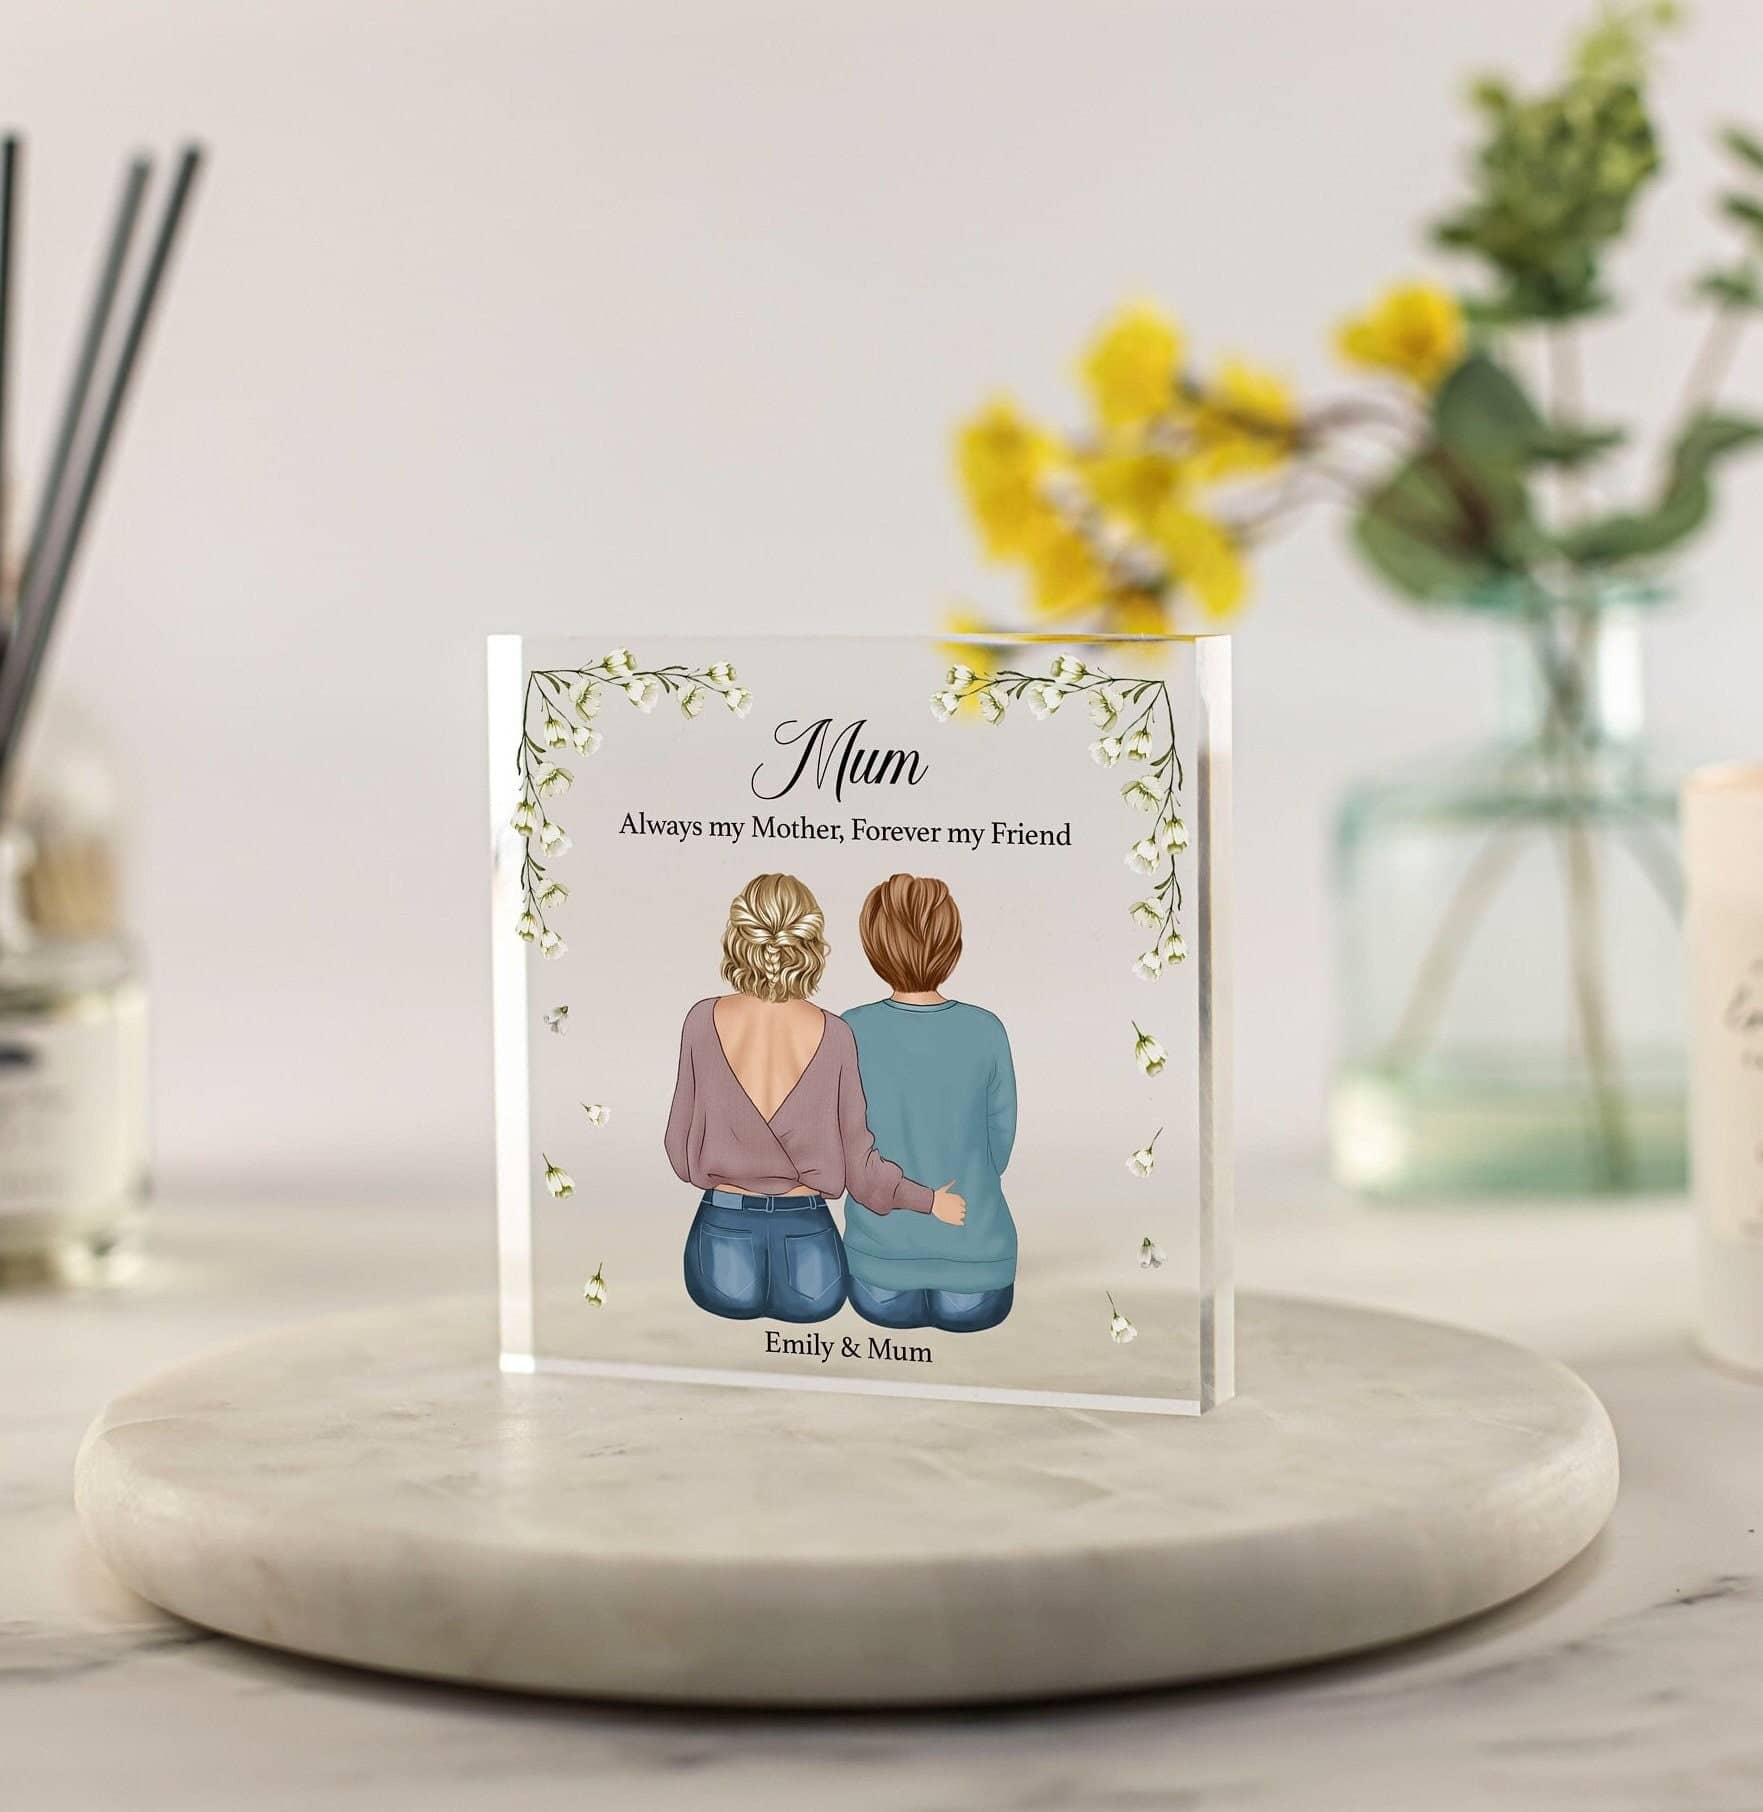 Personalised Mum Print Frame, Birthday Gift for Mum, Mothers Day Gifts, Christmas Gifts for Mum, Presents for Mom, Acrylic Block